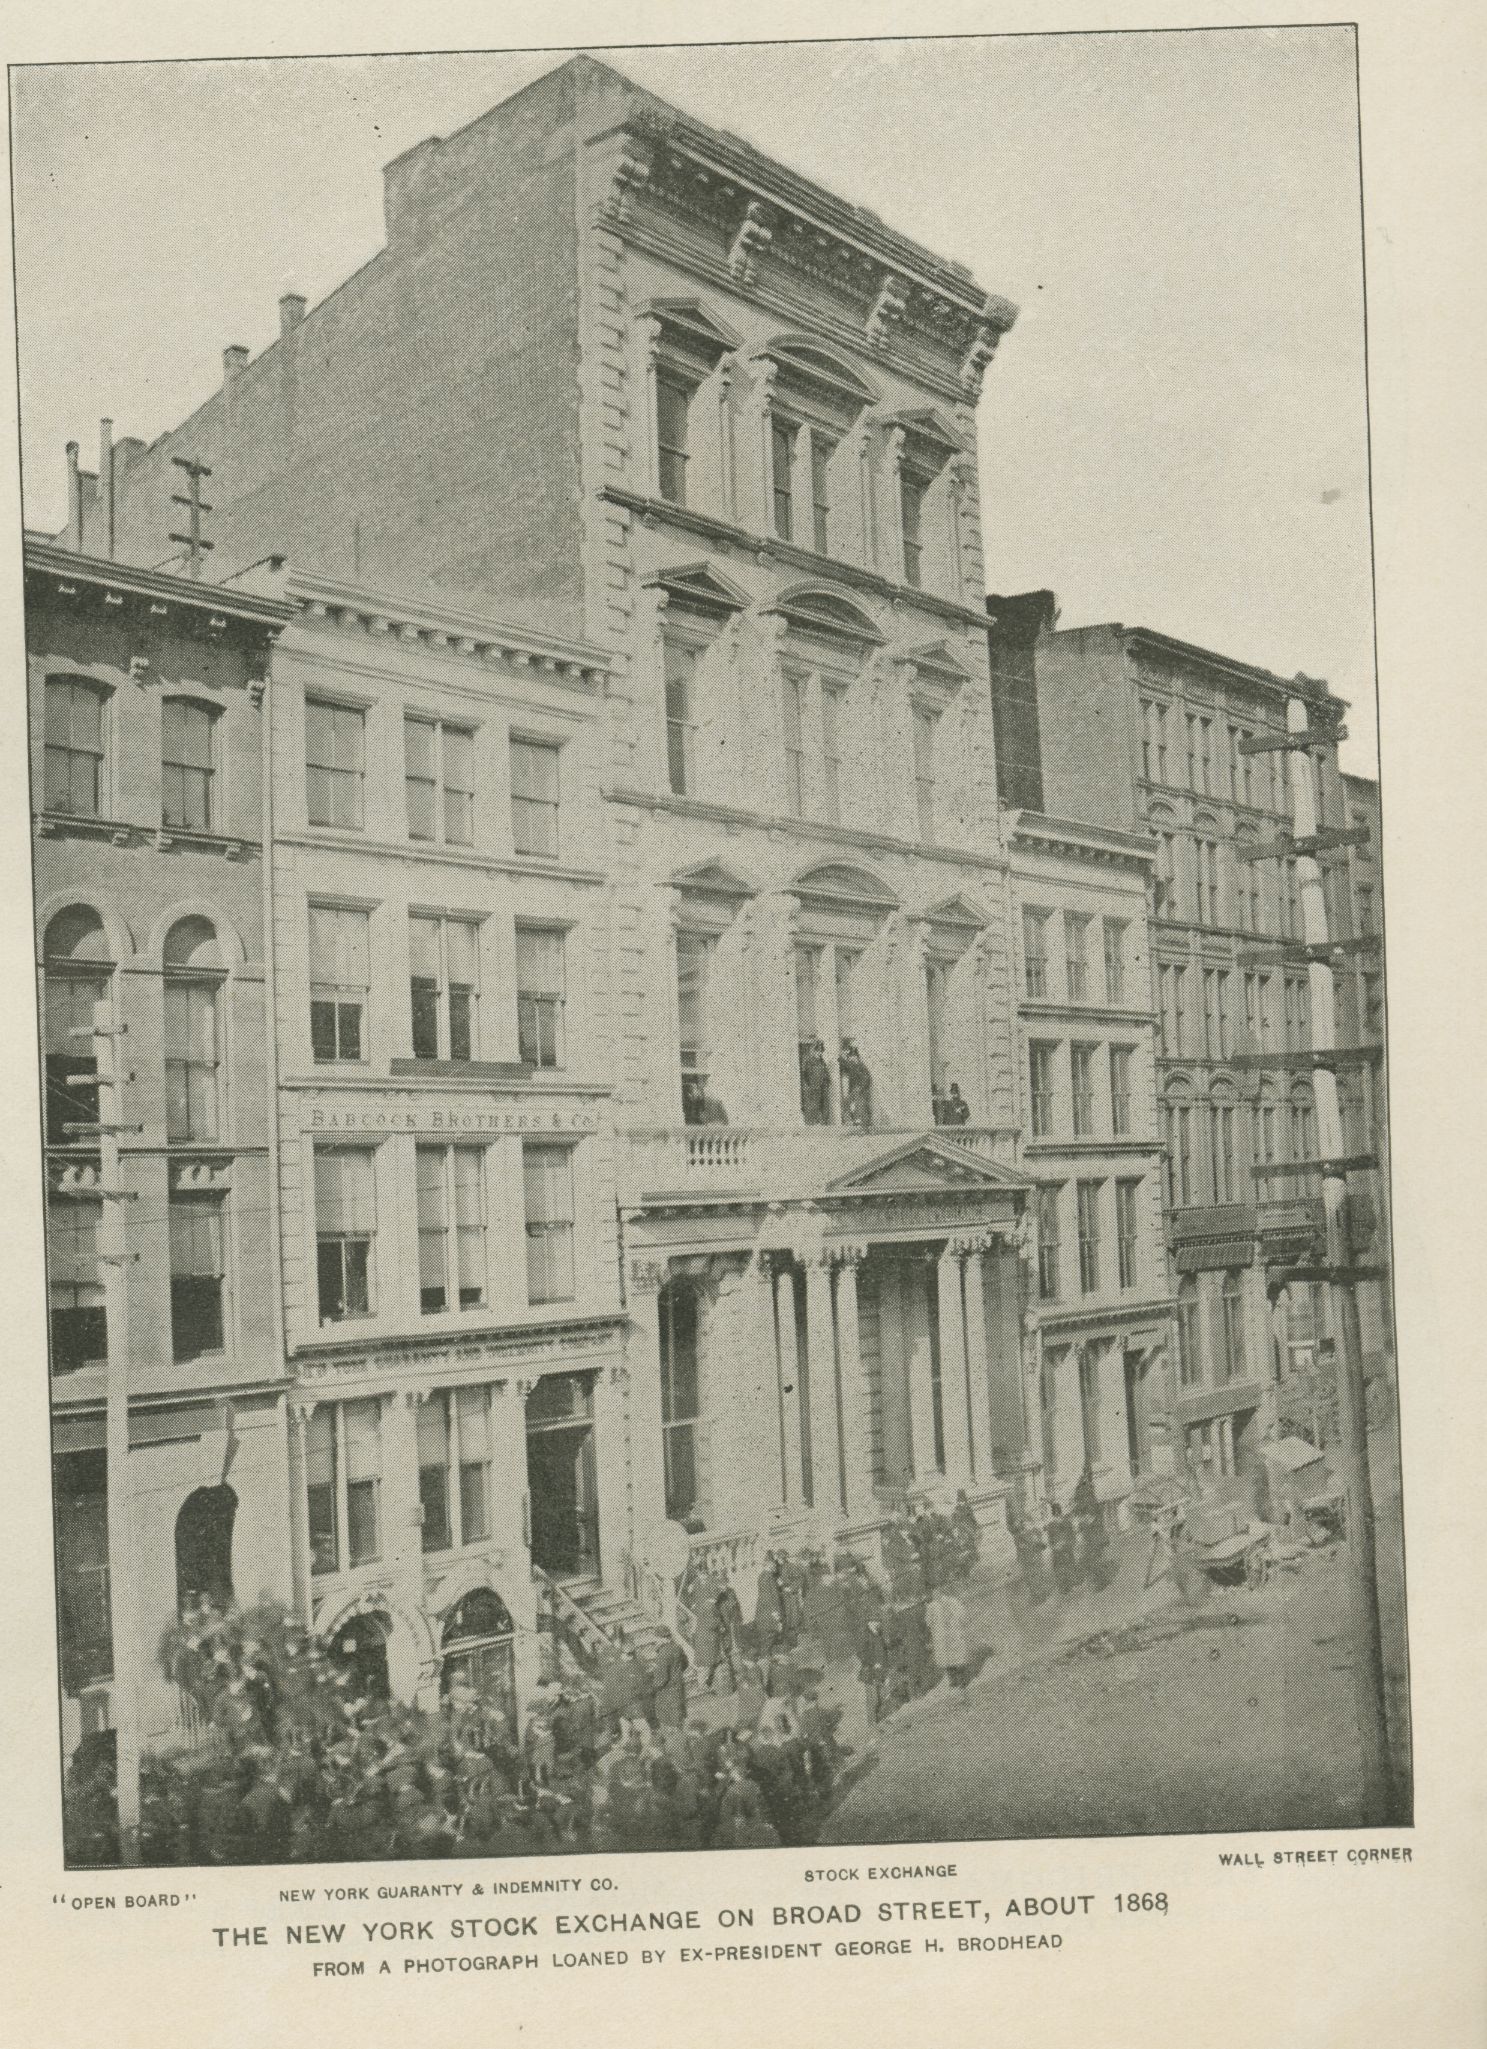 NYSE in 1868 on broad street